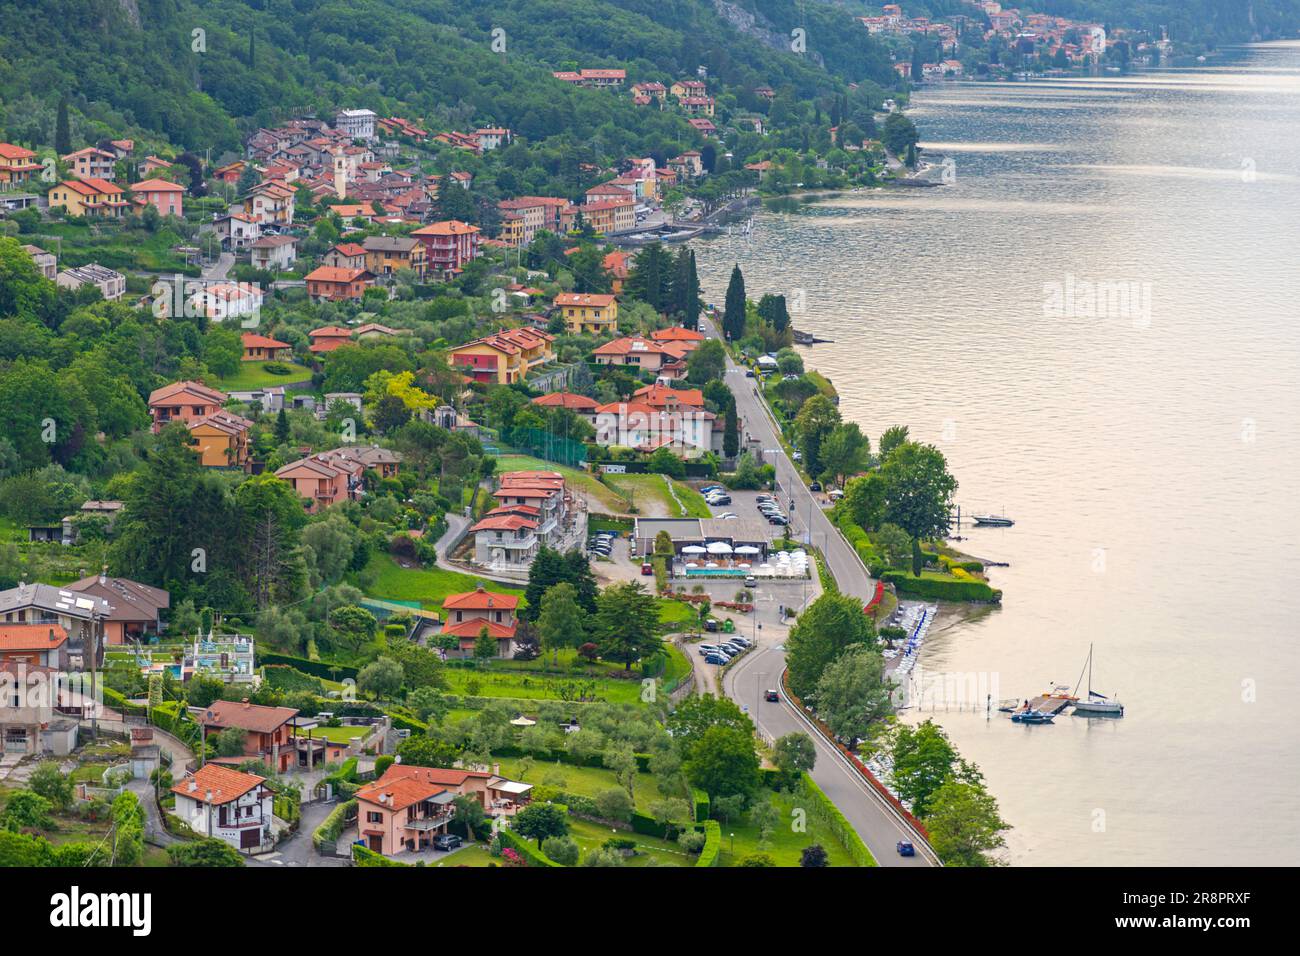 https://c8.alamy.com/comp/2R8PRXF/como-italy-june-14-2019-aerial-view-of-onno-town-at-lake-como-landscape-in-lombardy-summer-afternoon-2R8PRXF.jpg